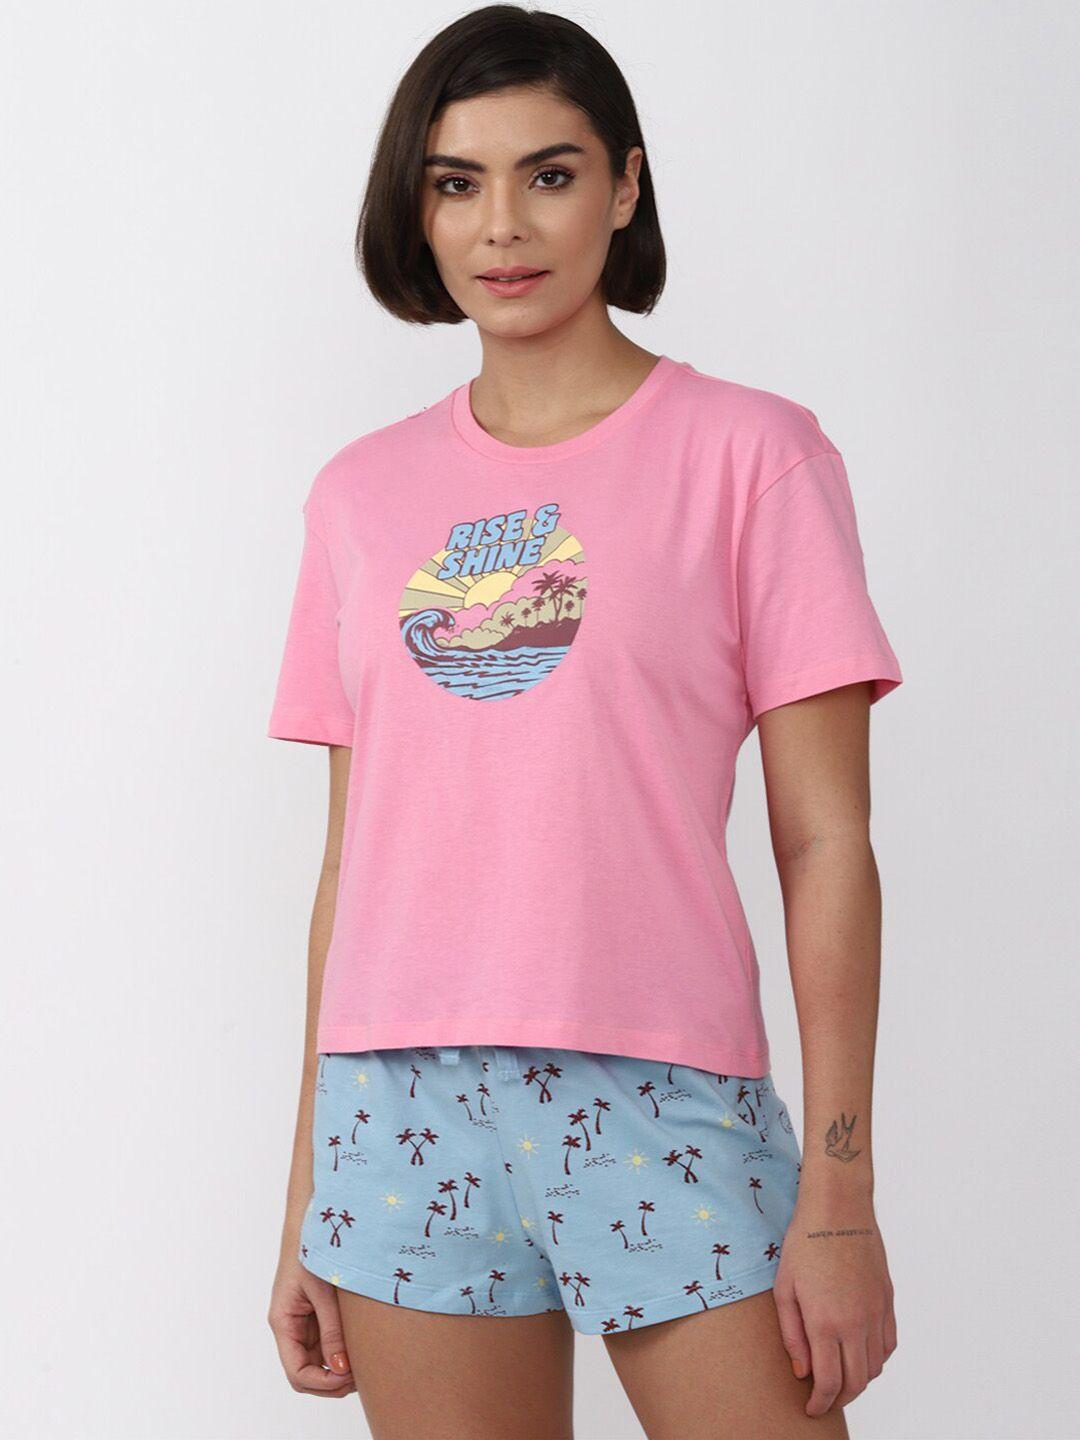 forever-21-women-pink-&-blue-printed-pure-cotton-sleepsuit